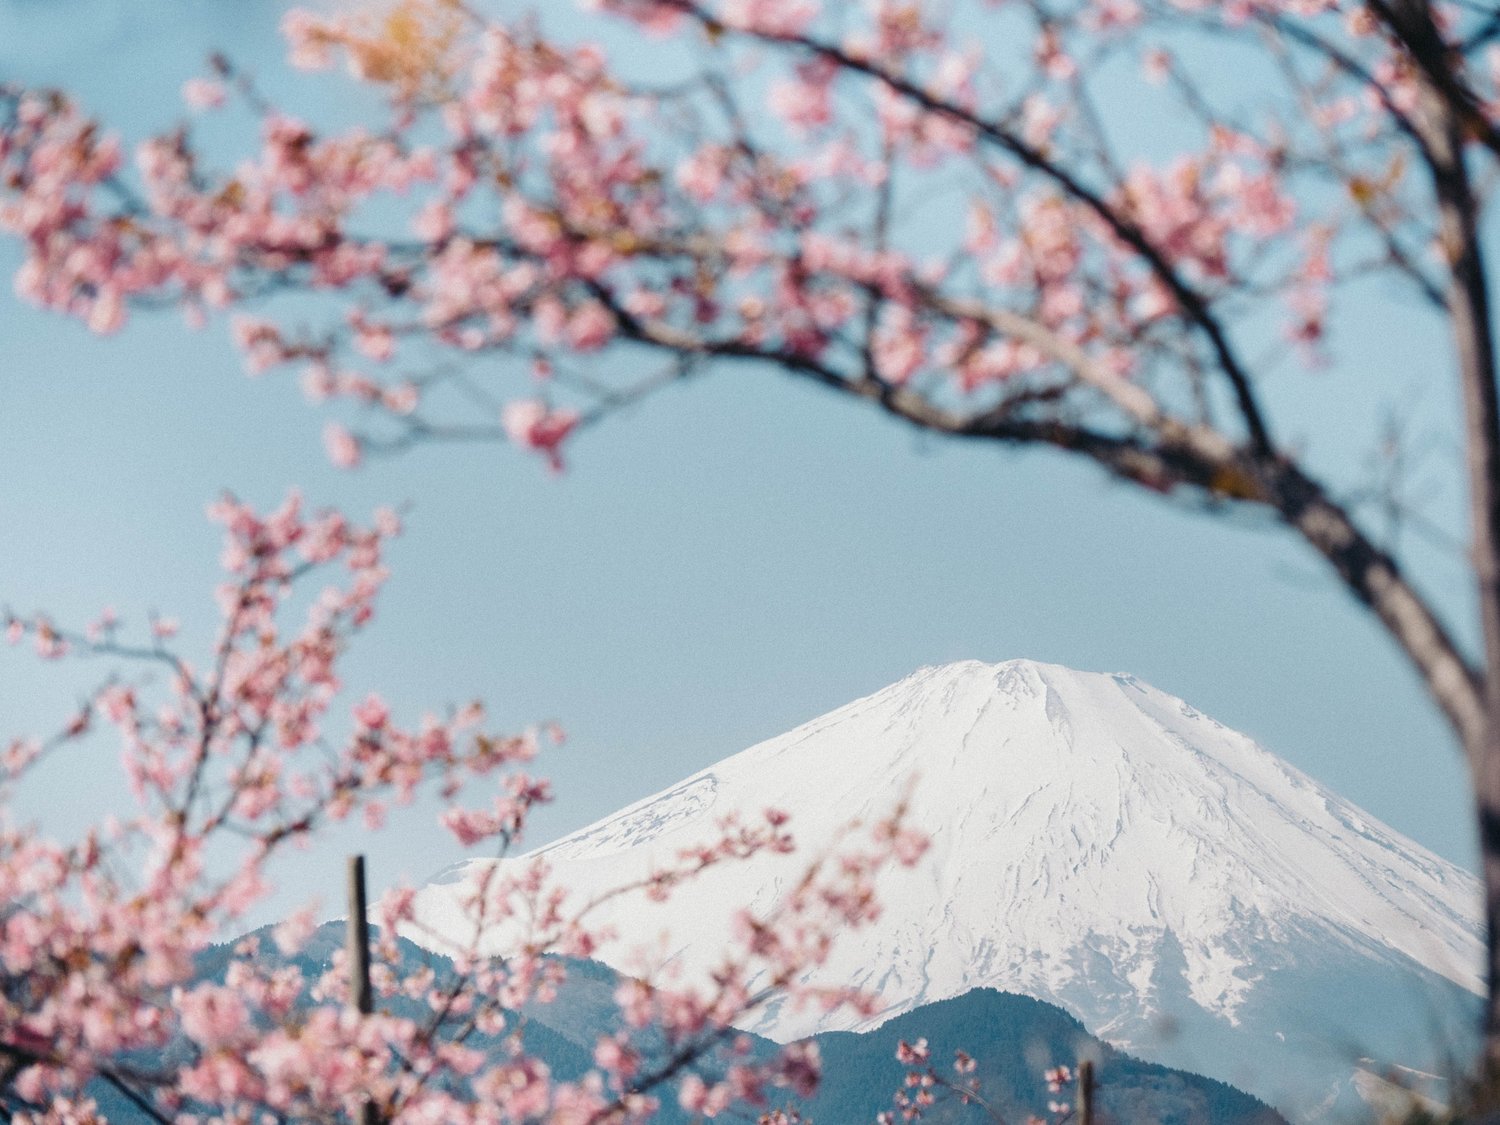 Mount Fuji towering over a landscape adorned with pink flowers, showcasing the beauty of nature